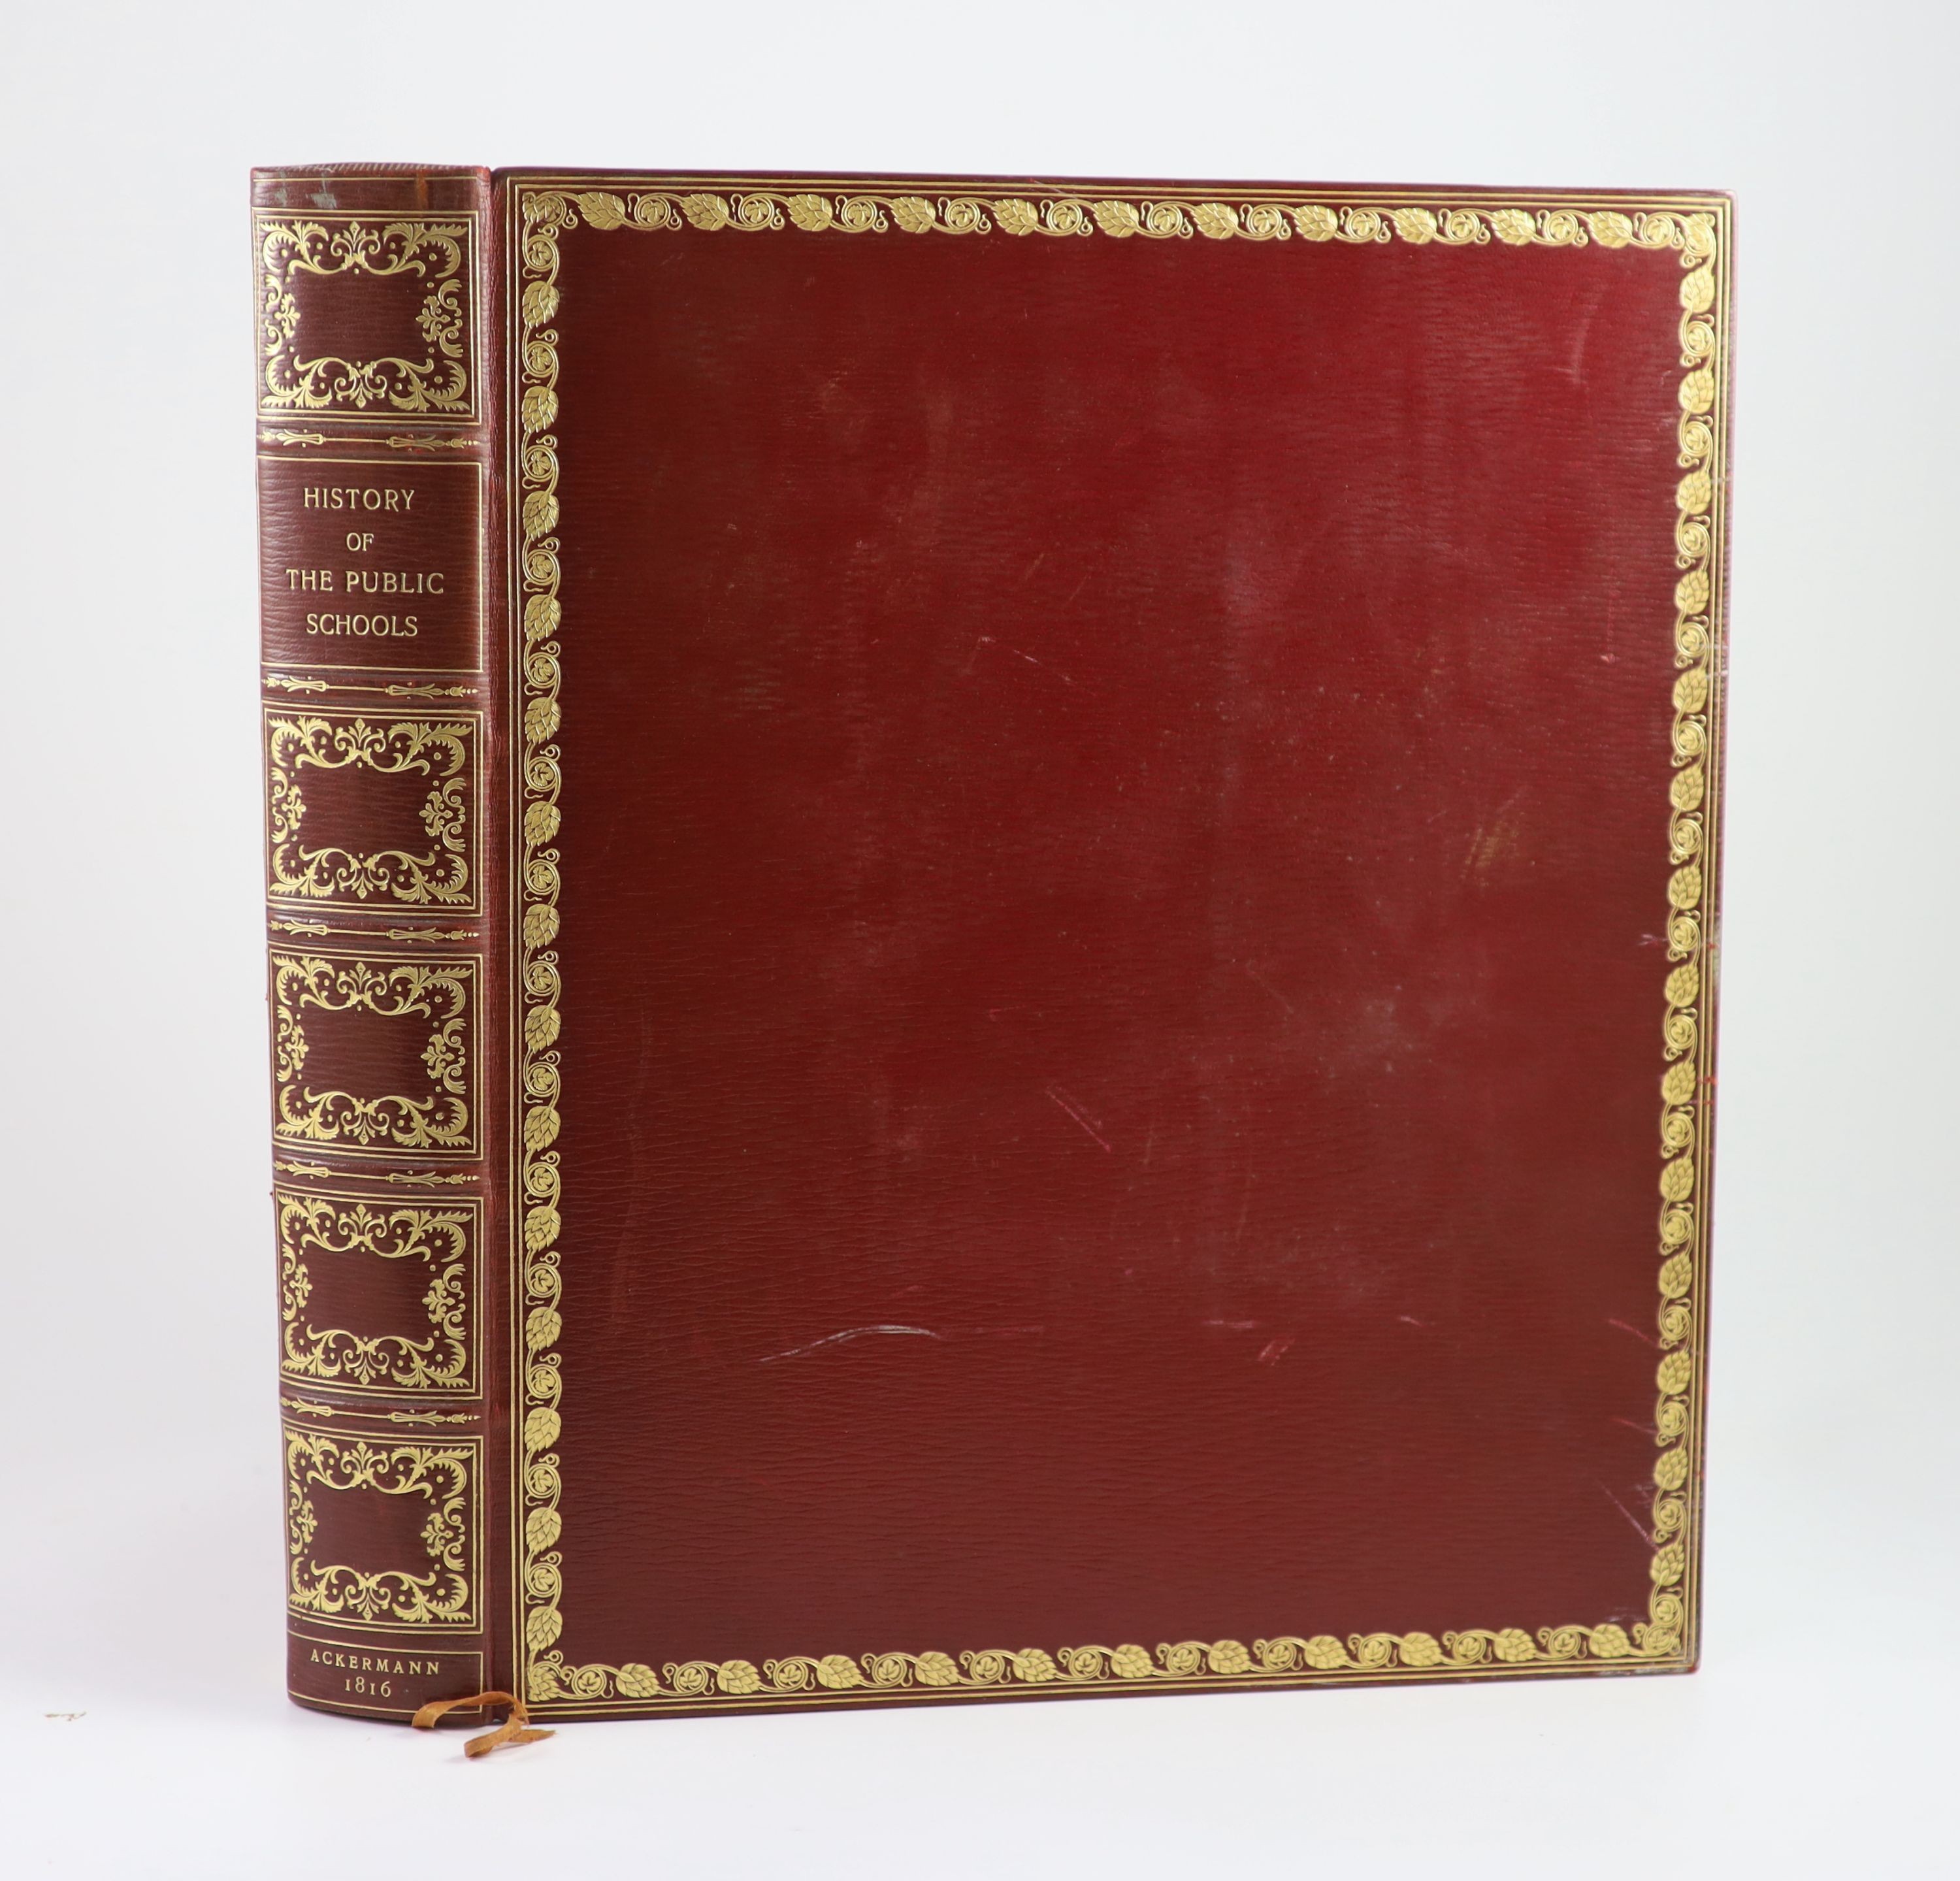 Ackermann Publications, Rudolph-London - The History of the Colleges Winchester, Eton and Westminster, 1st edition, qto, red morocco gilt, with 48 hand-coloured plates, London, 1816